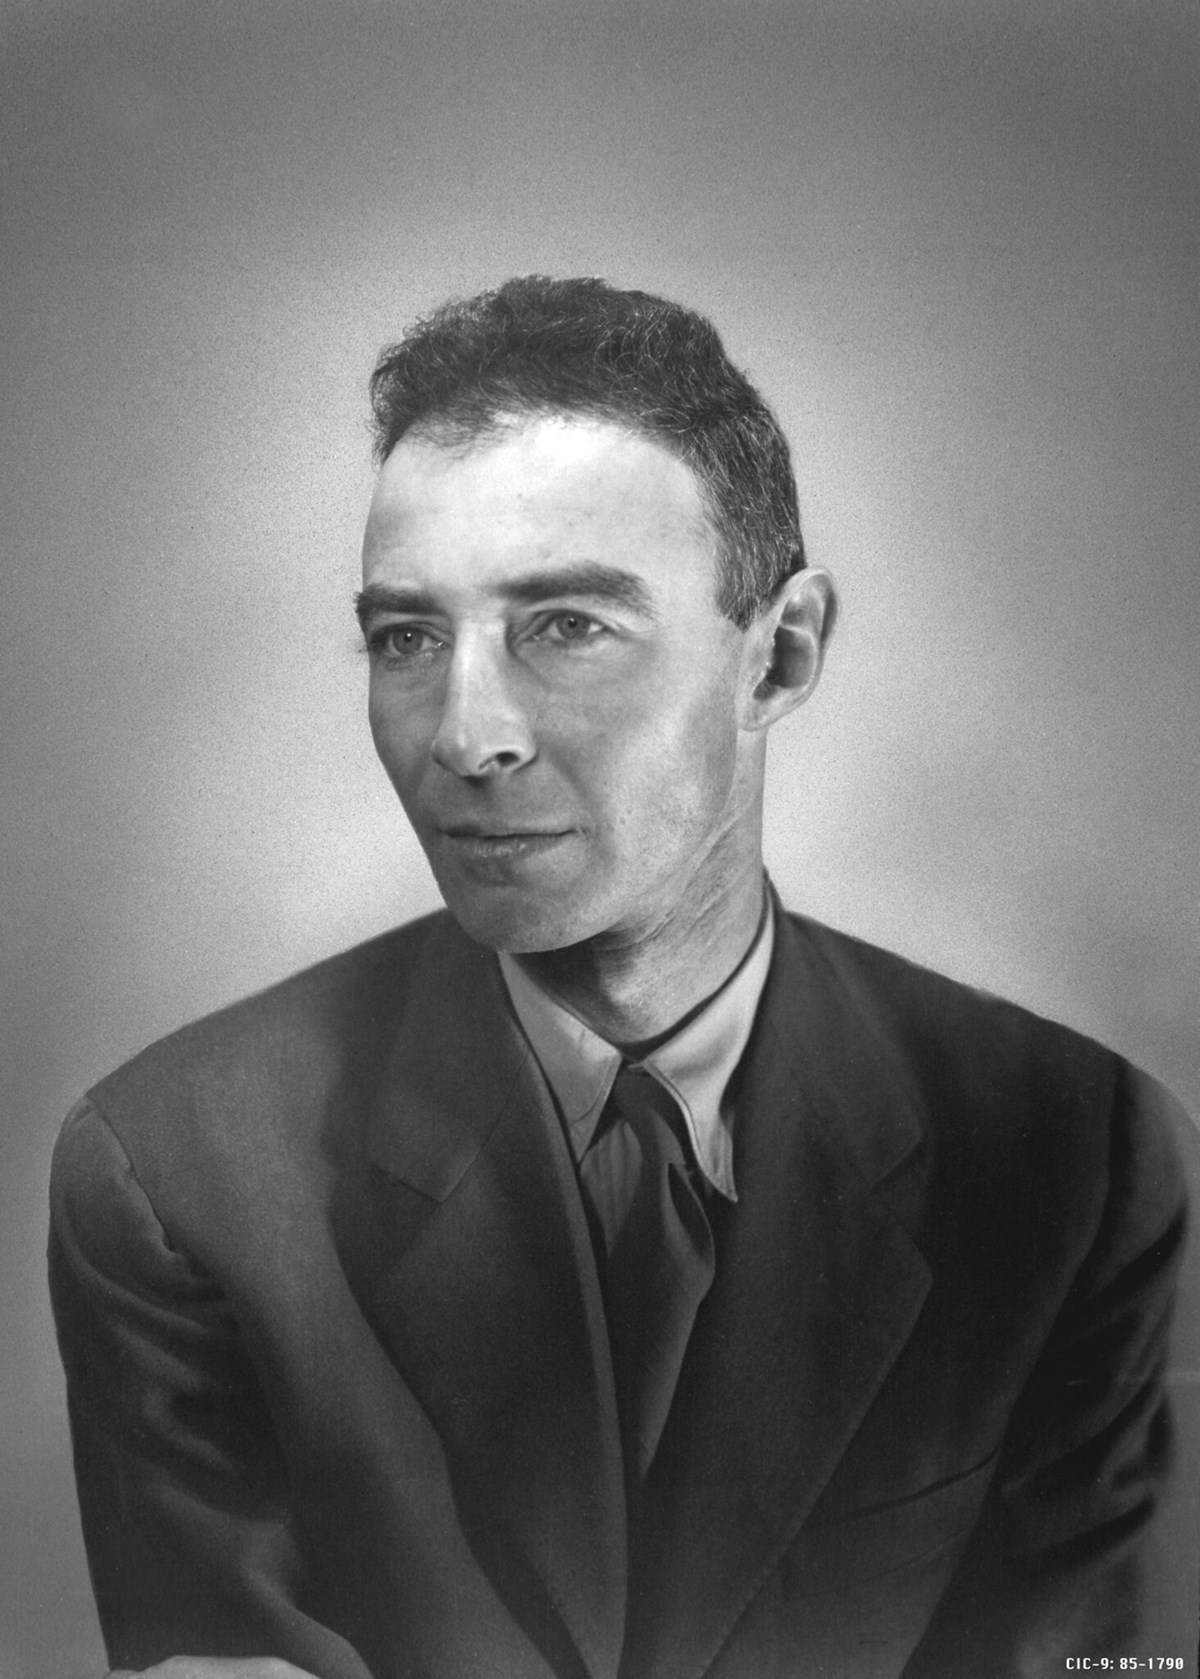 Black and white portrait photo of Oppenheimer in suit